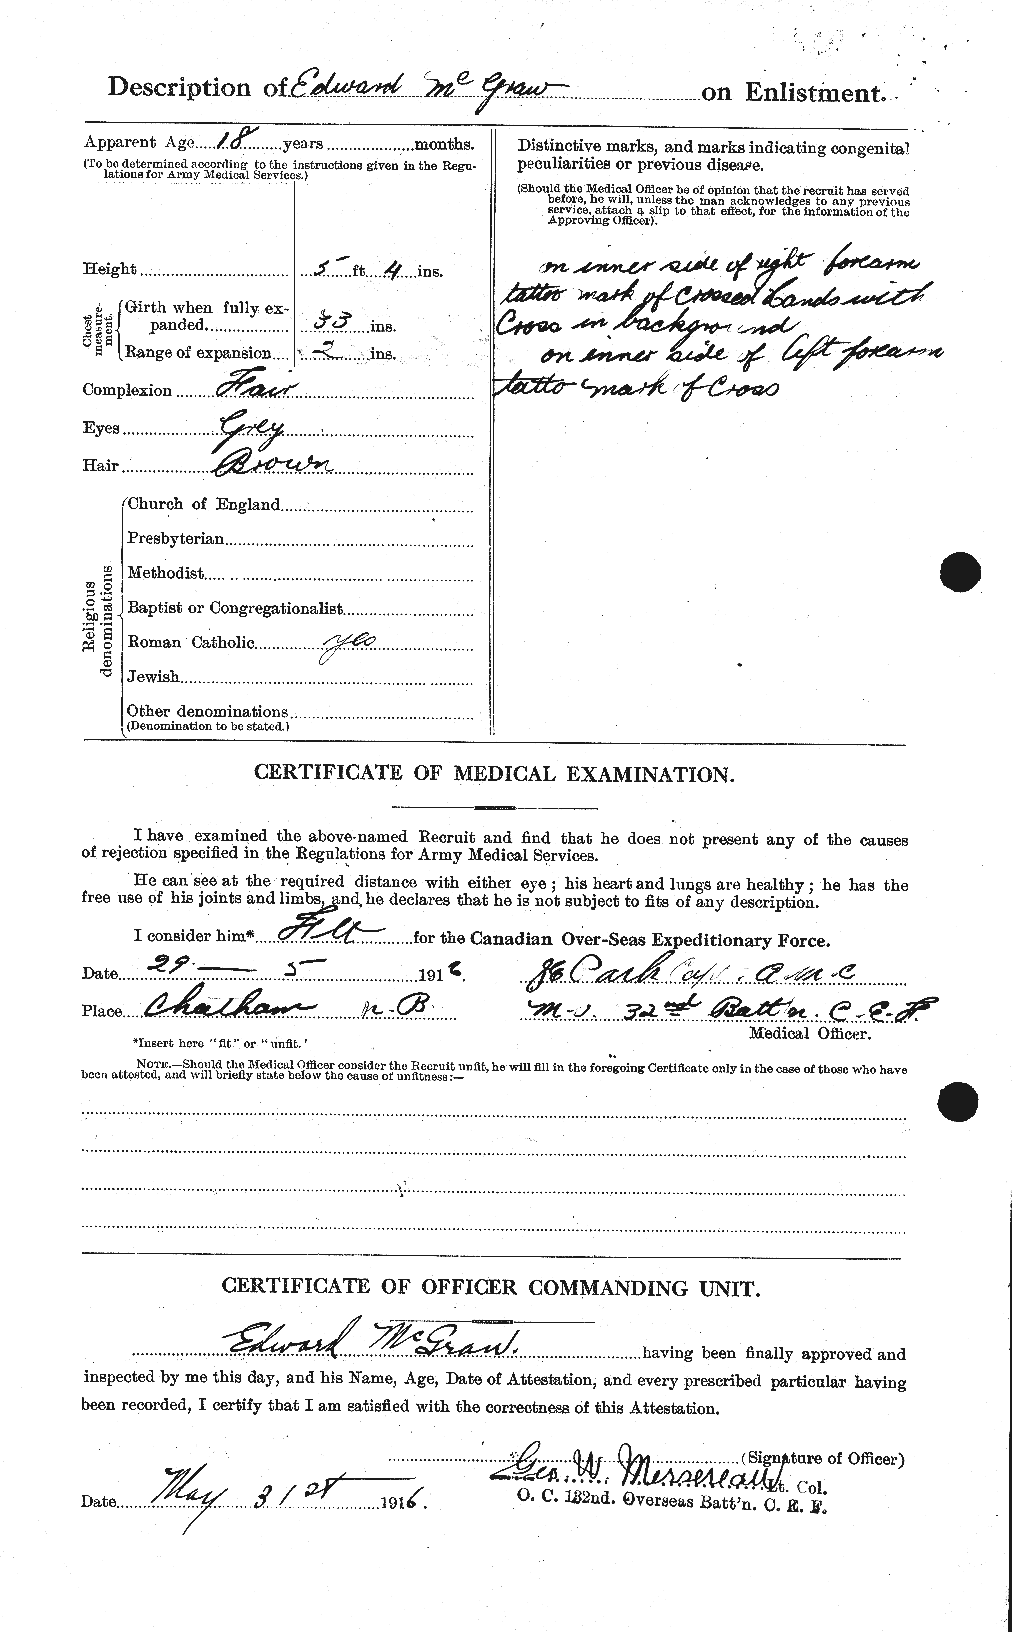 Personnel Records of the First World War - CEF 523721b